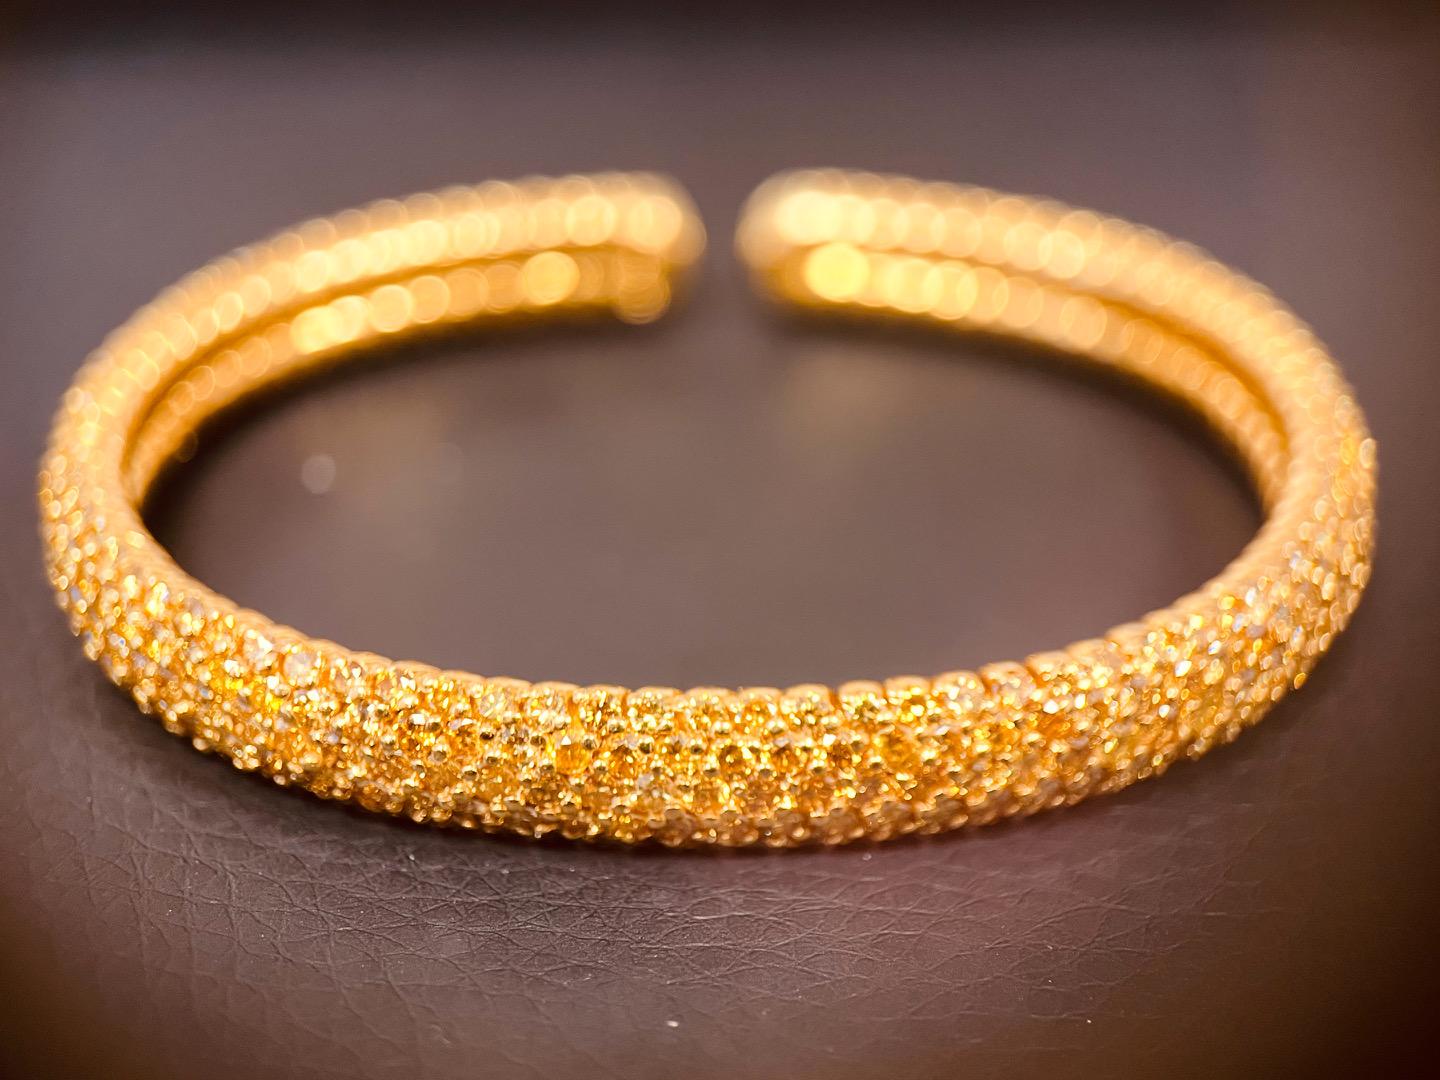 A 12 Carats Pave' Set Fancy Yellow Diamond Bangle, 9mm Width For Sale 1